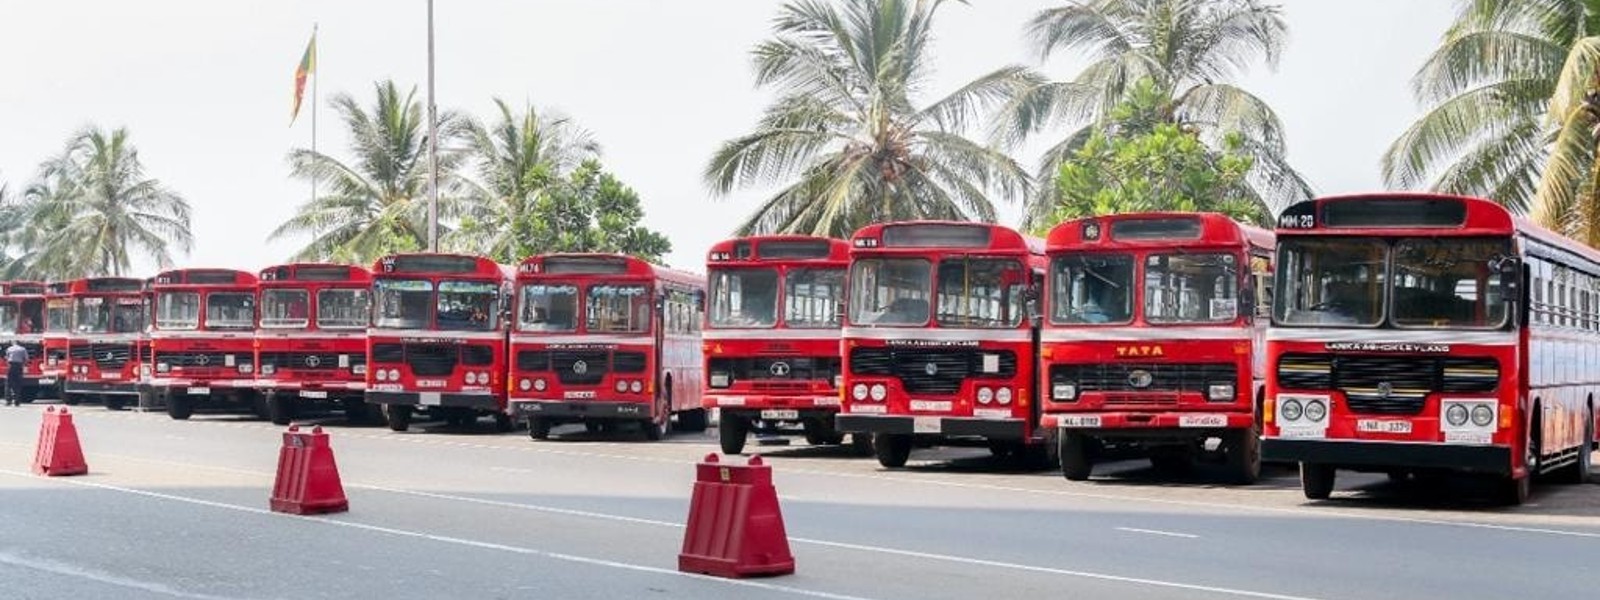 SLTB buses to halt service at 6:00 p.m. today (02)